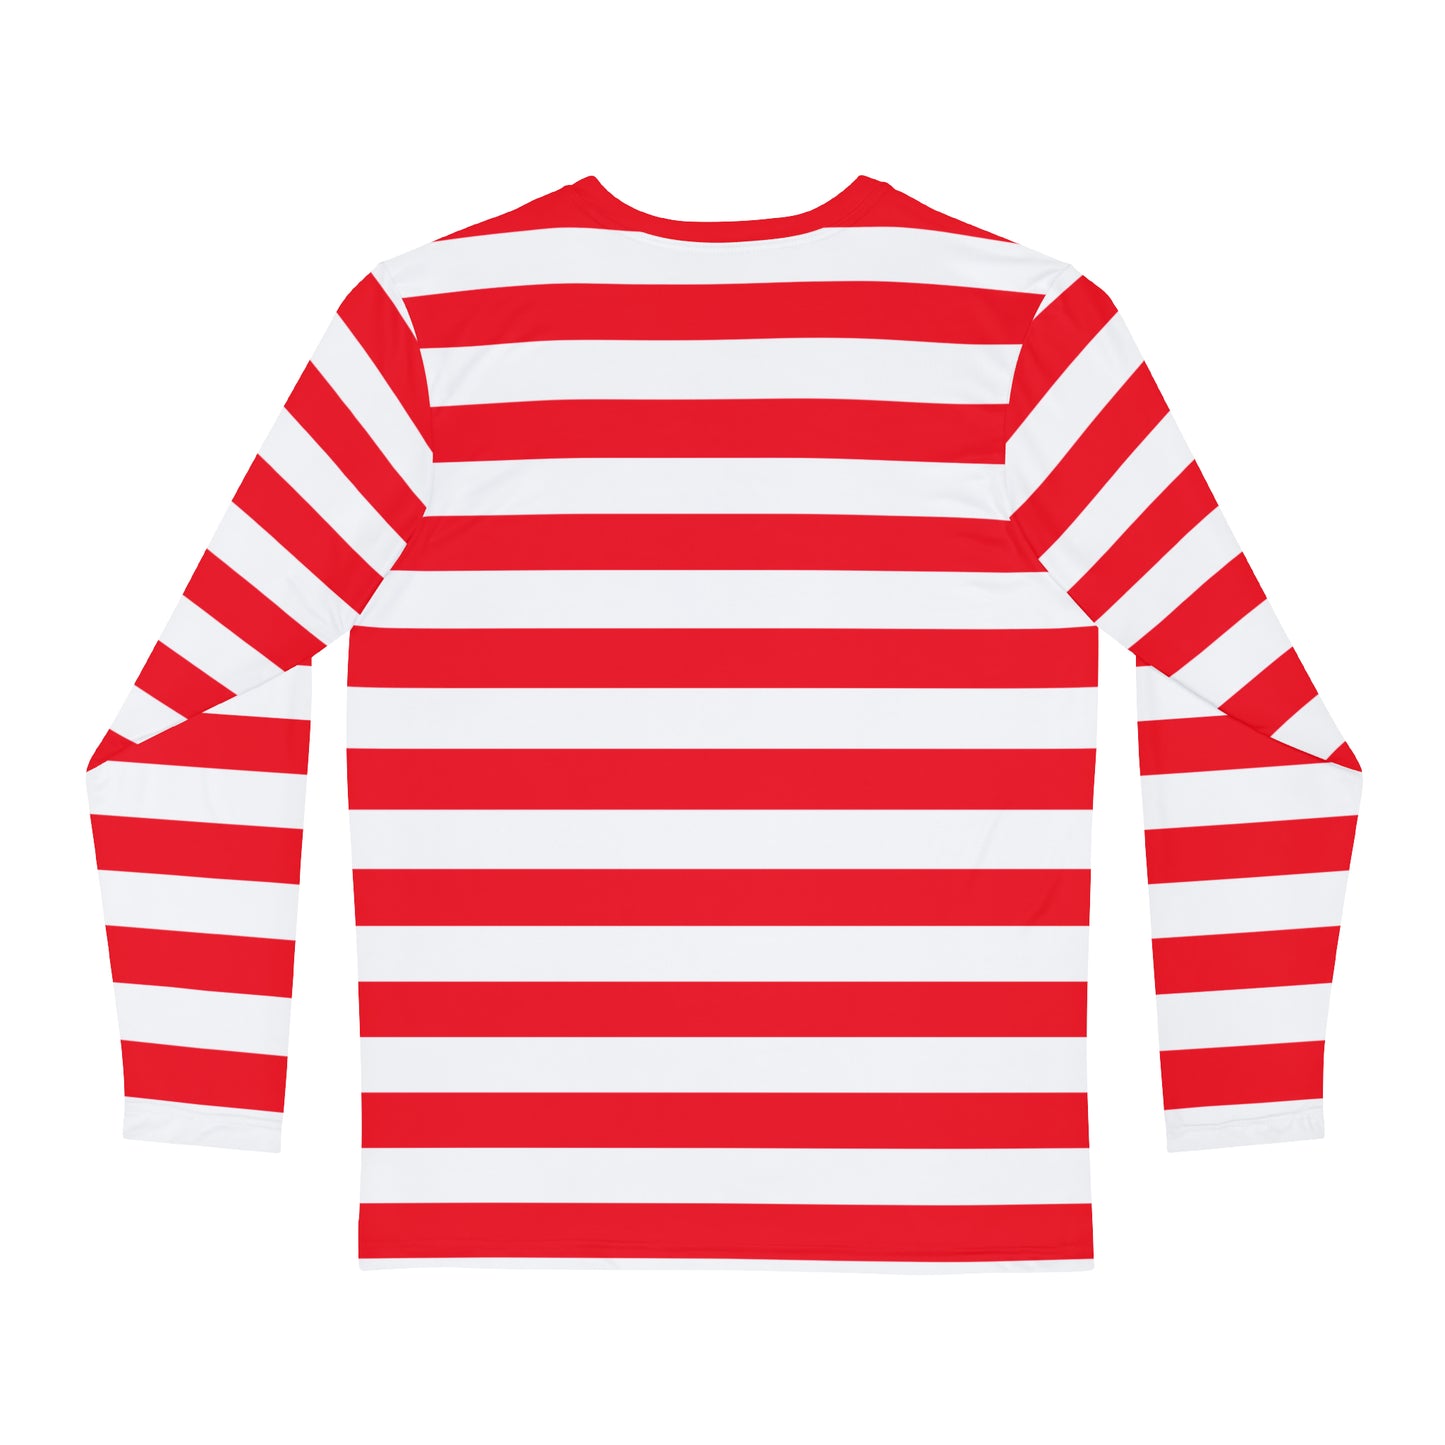 Red and White Striped Men Long Sleeve Tshirt, Unisex Women Designer Graphic Aesthetic Printed Crew Neck Shirt Tee Plus Size